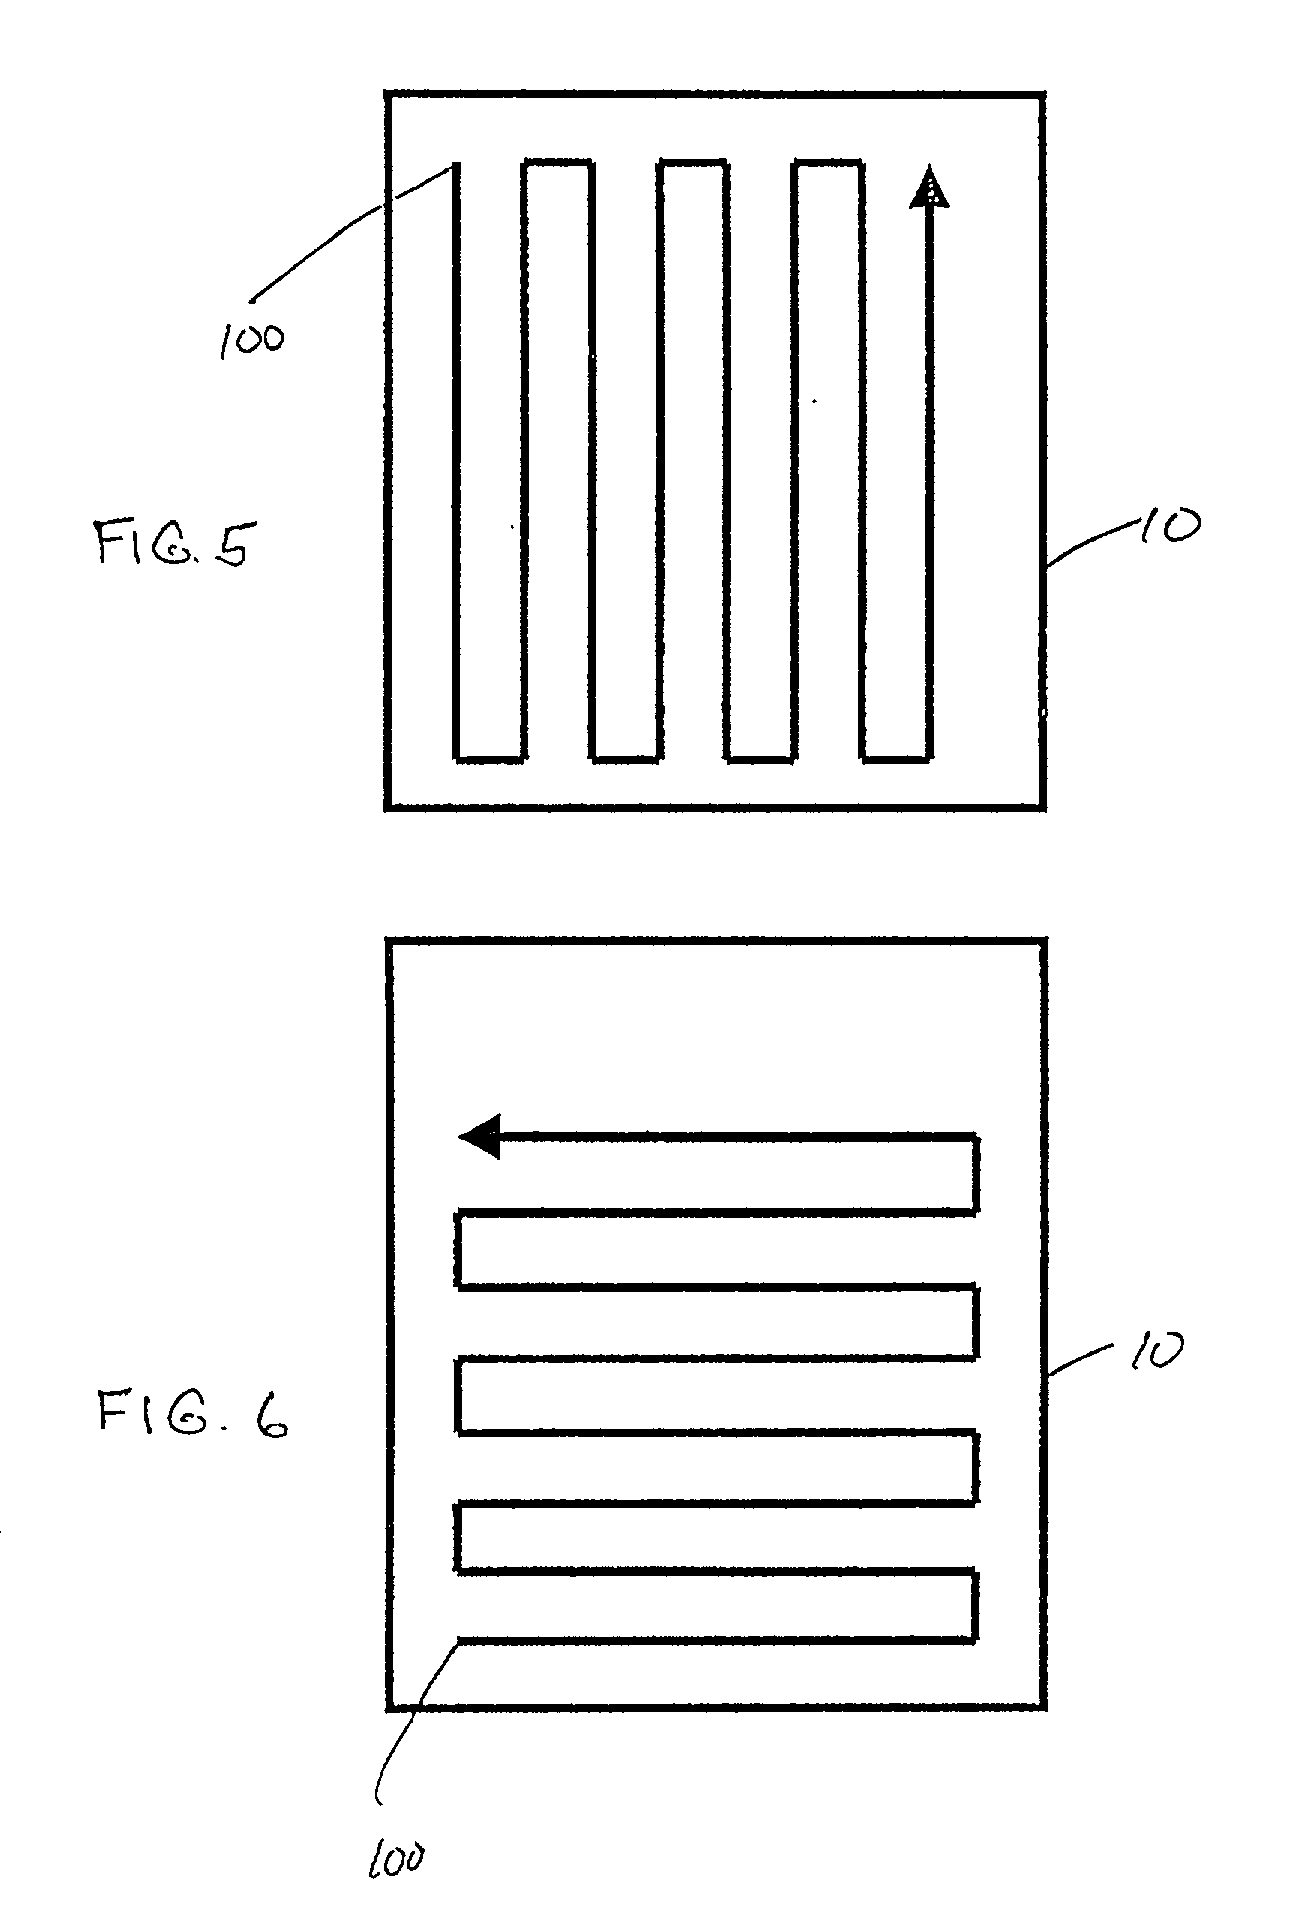 Orthopedic implant and method of making metal articles